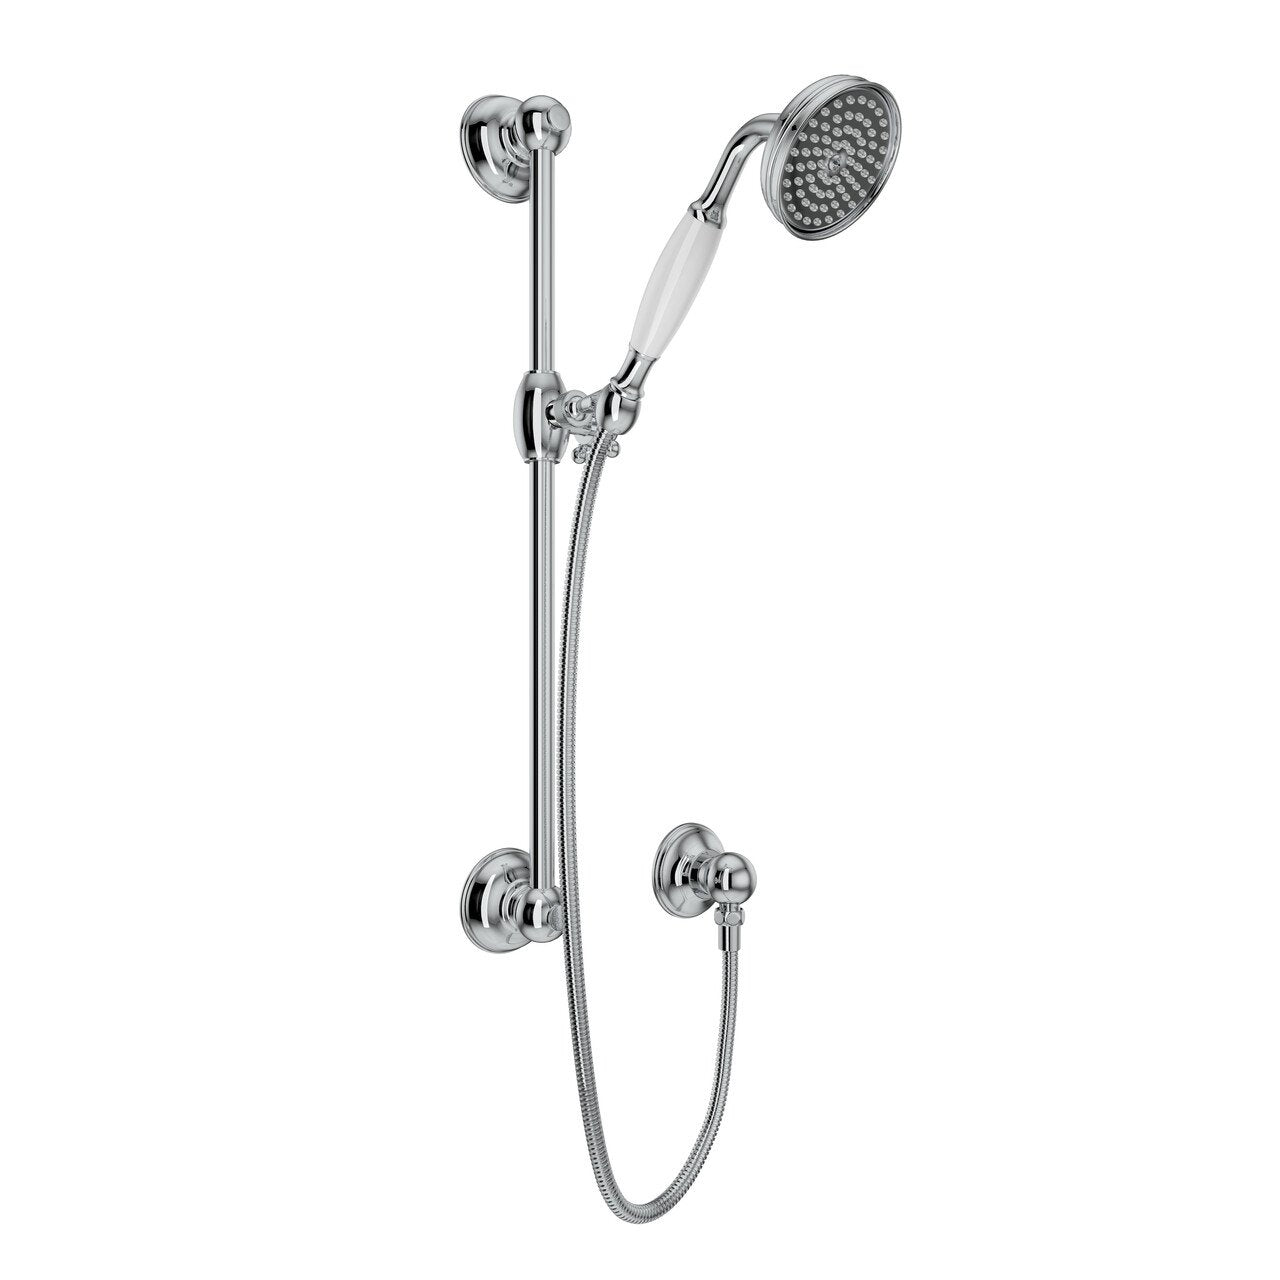 ROHL Single-Function Anti-Calcium Handshower Hose Bar and Outlet Set - BNGBath